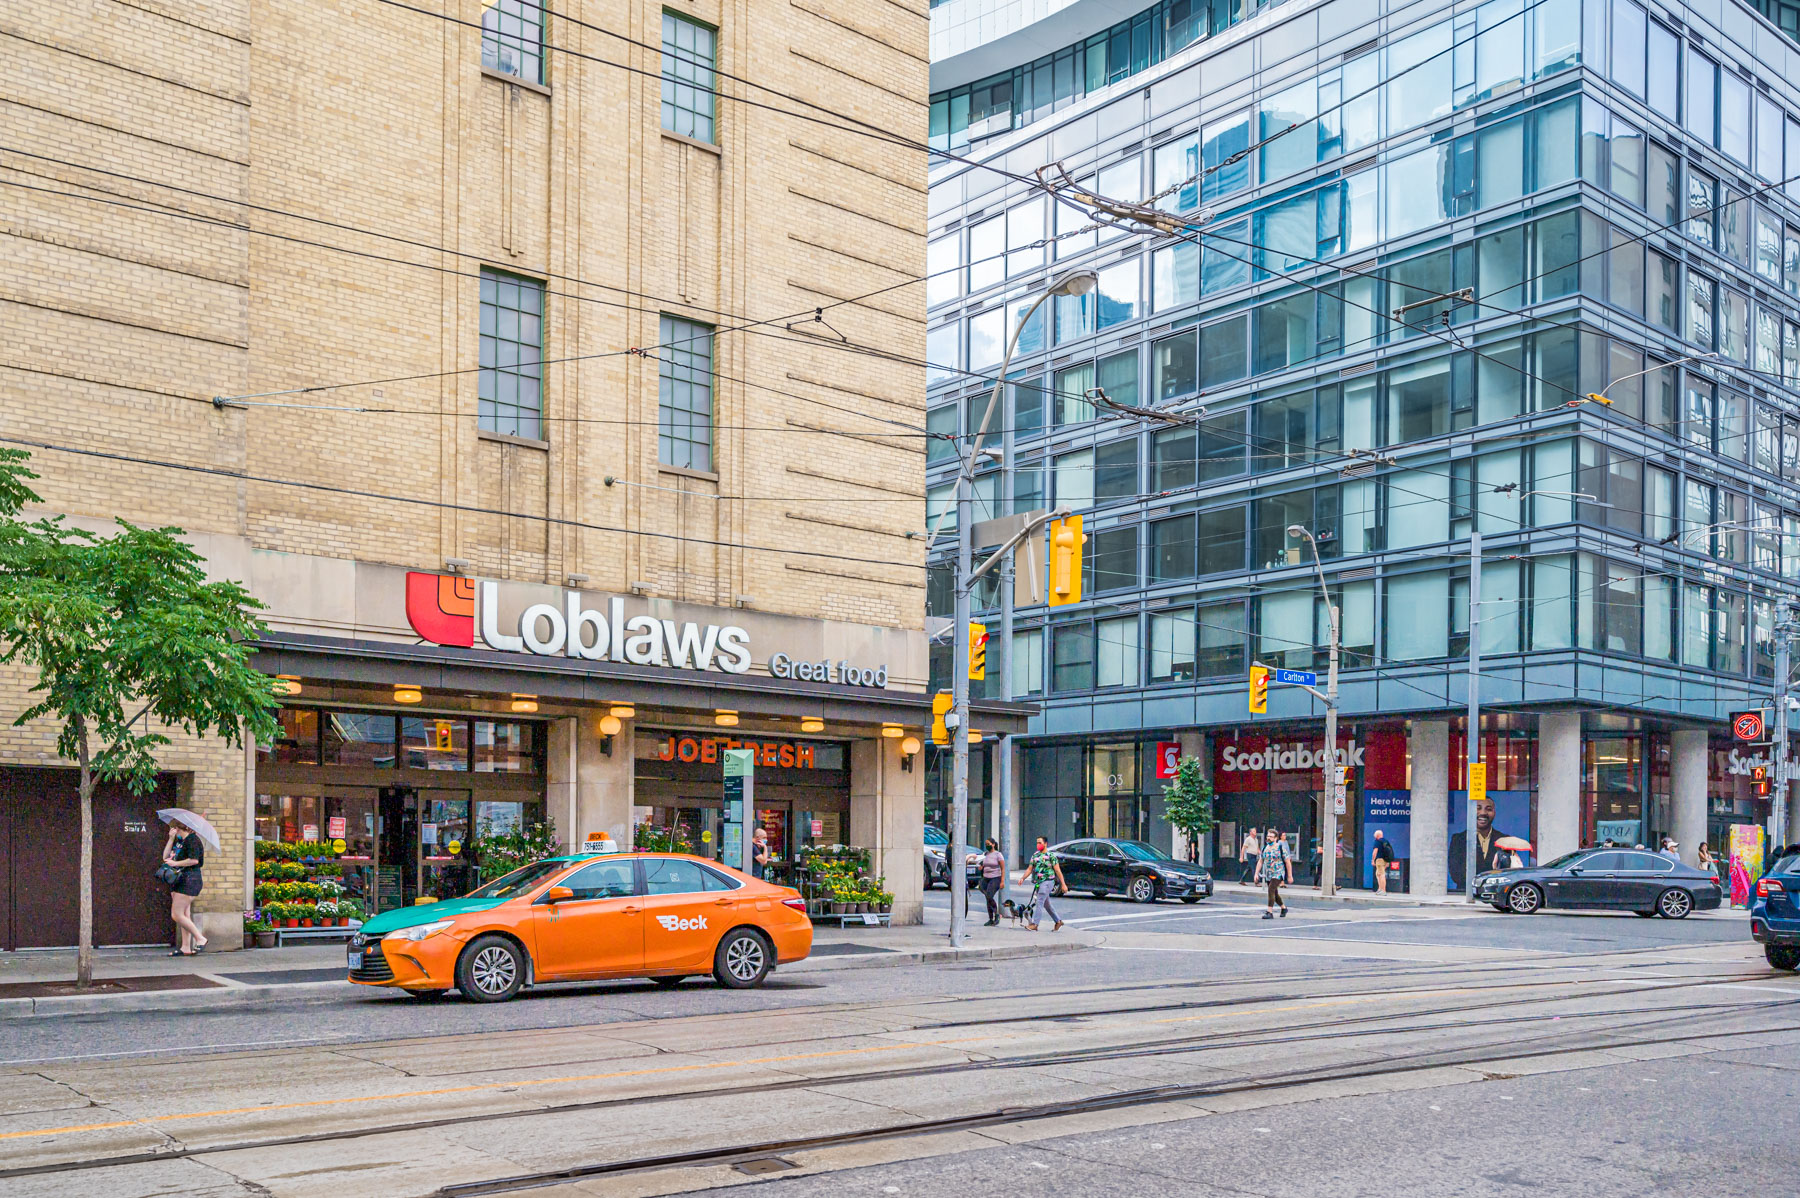 Across the street photo of Loblaws and Scotiabank exteriors.